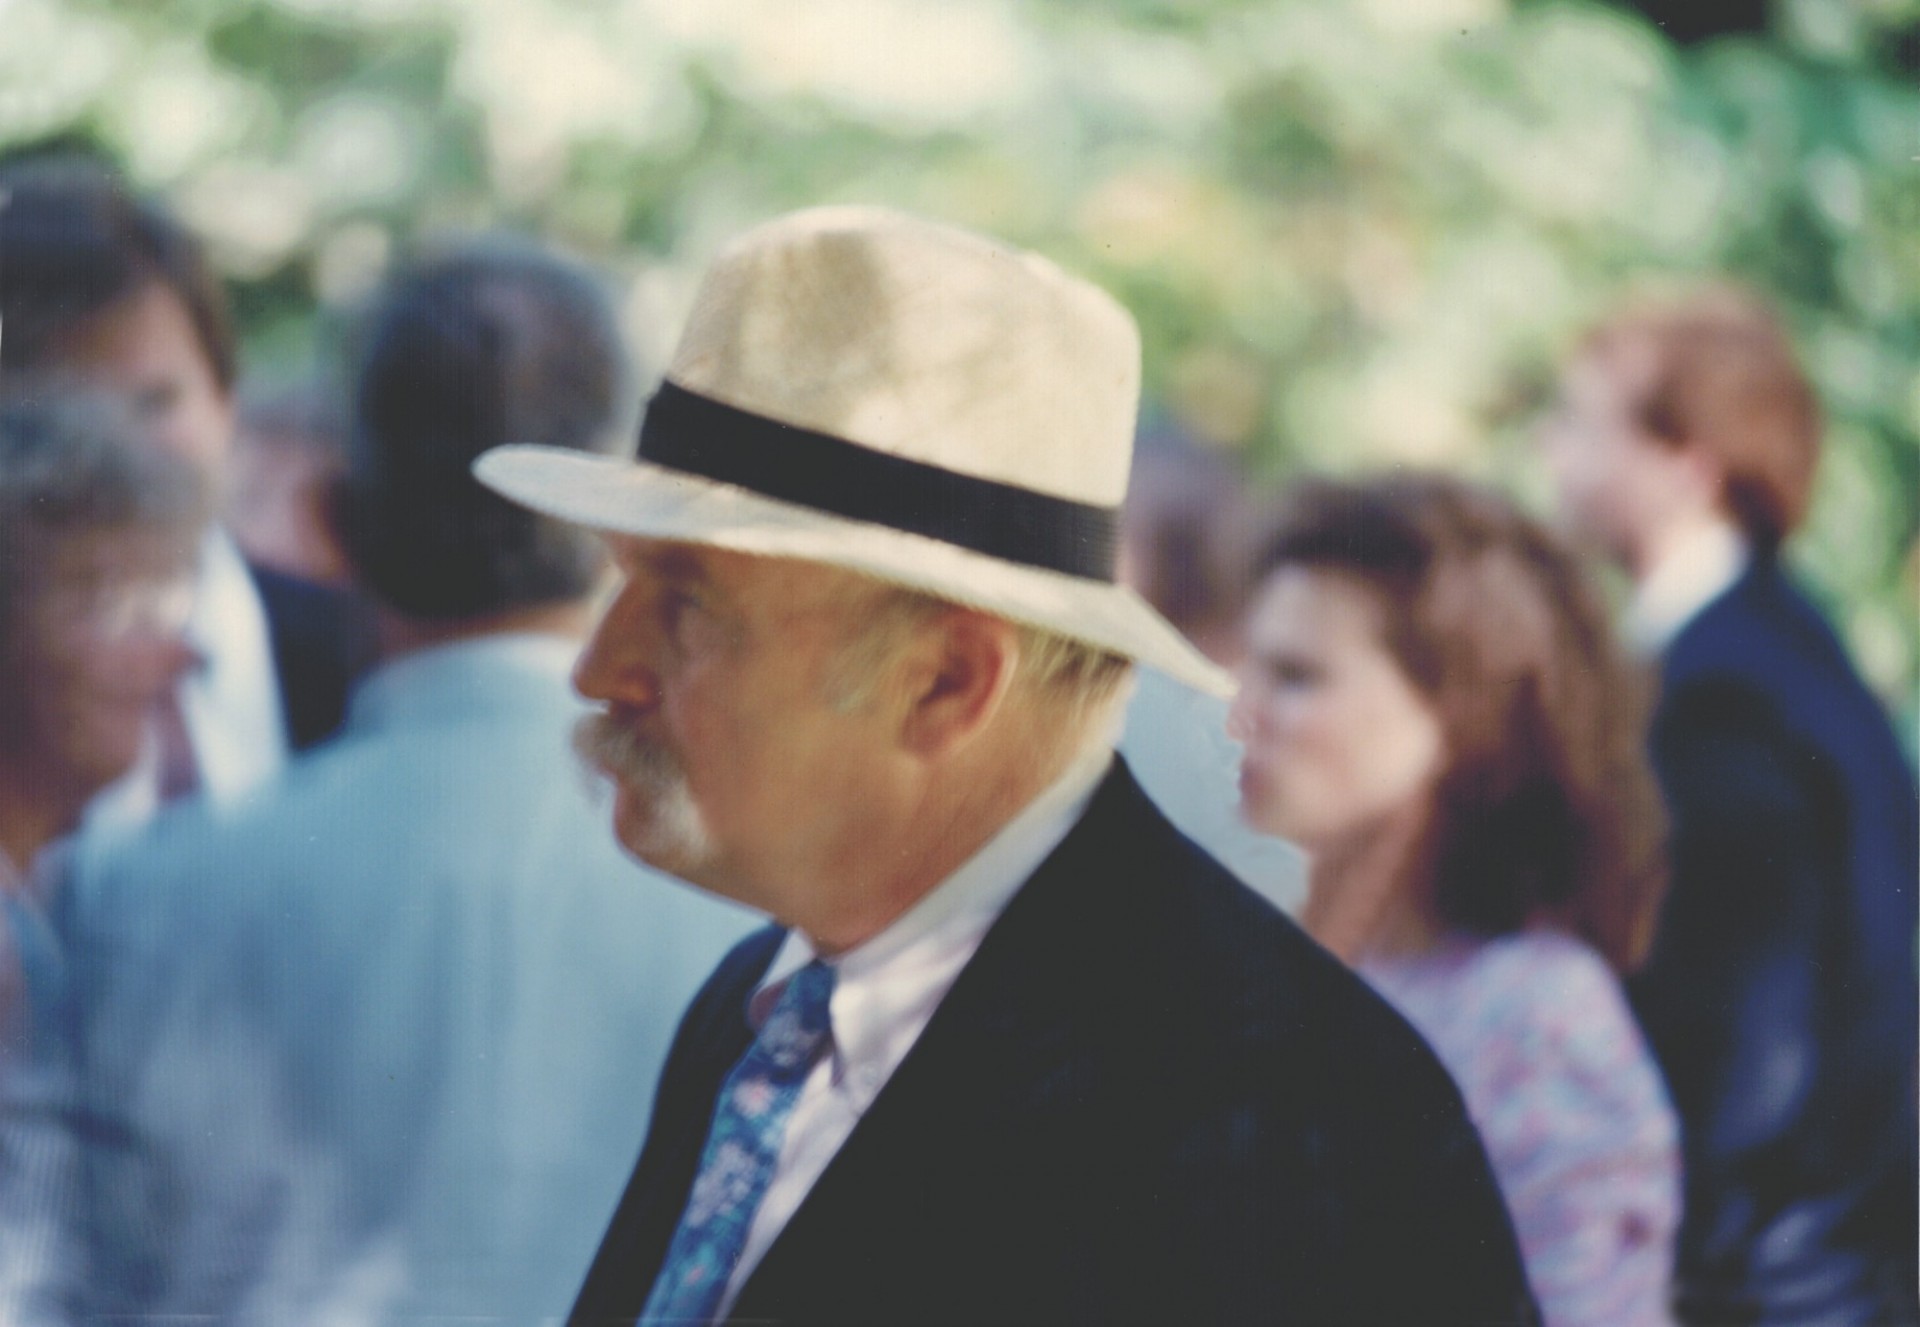 Walter Pitman at the wedding of Sara Tebbens with Christopher Barton, summer 1991. A very rare photo of Walter from the side!